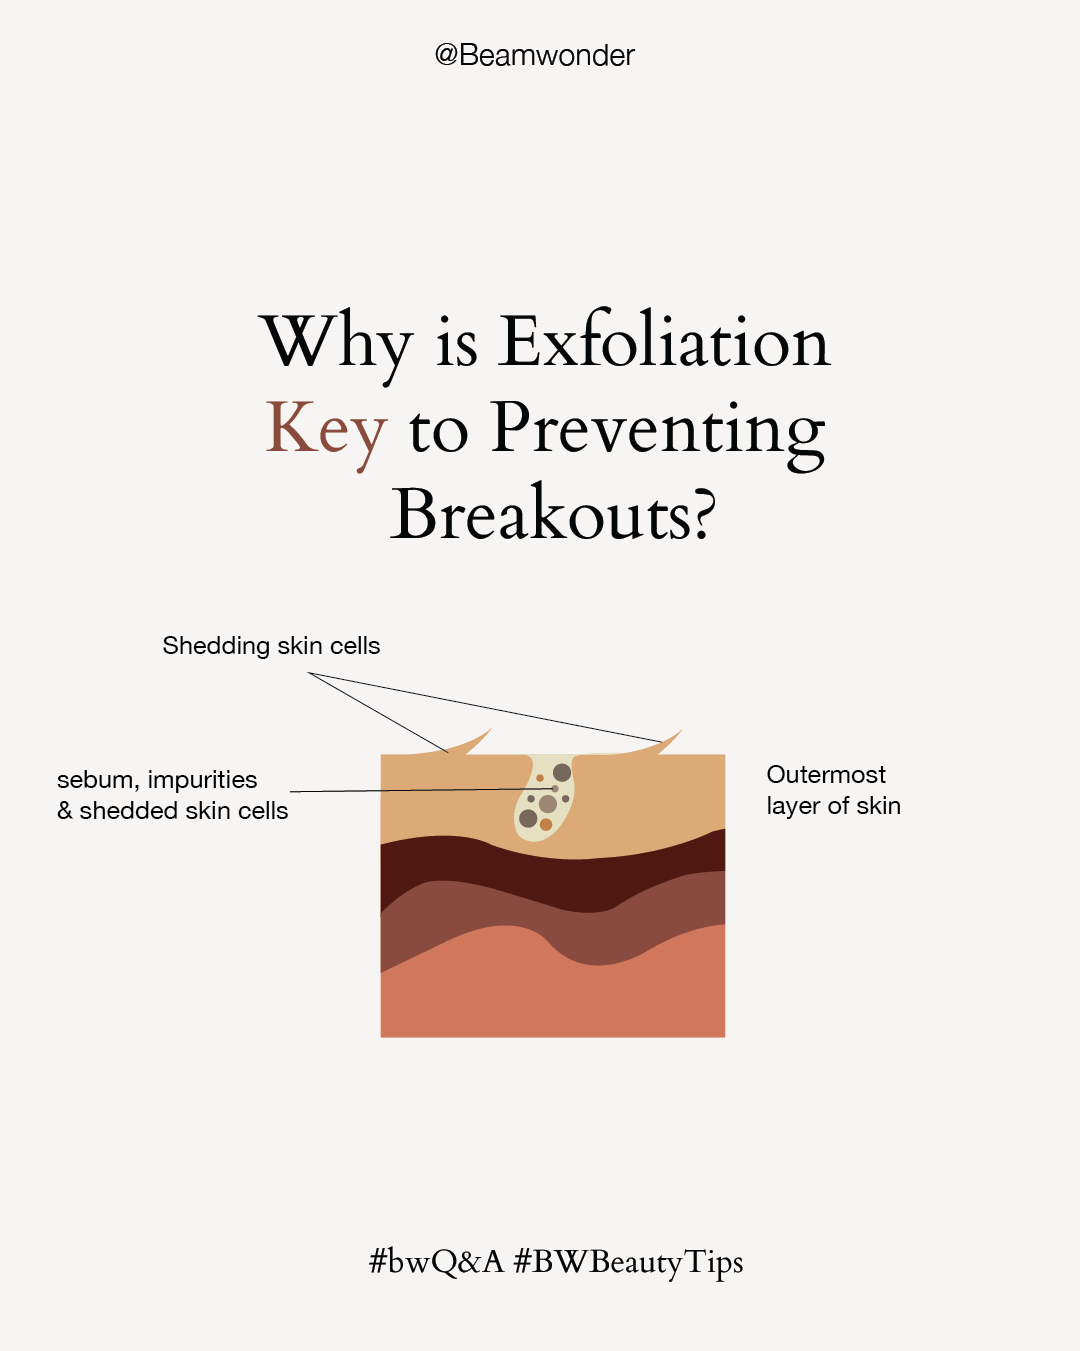 Q&A: Why is Exfoliation Key to Preventing Breakouts?